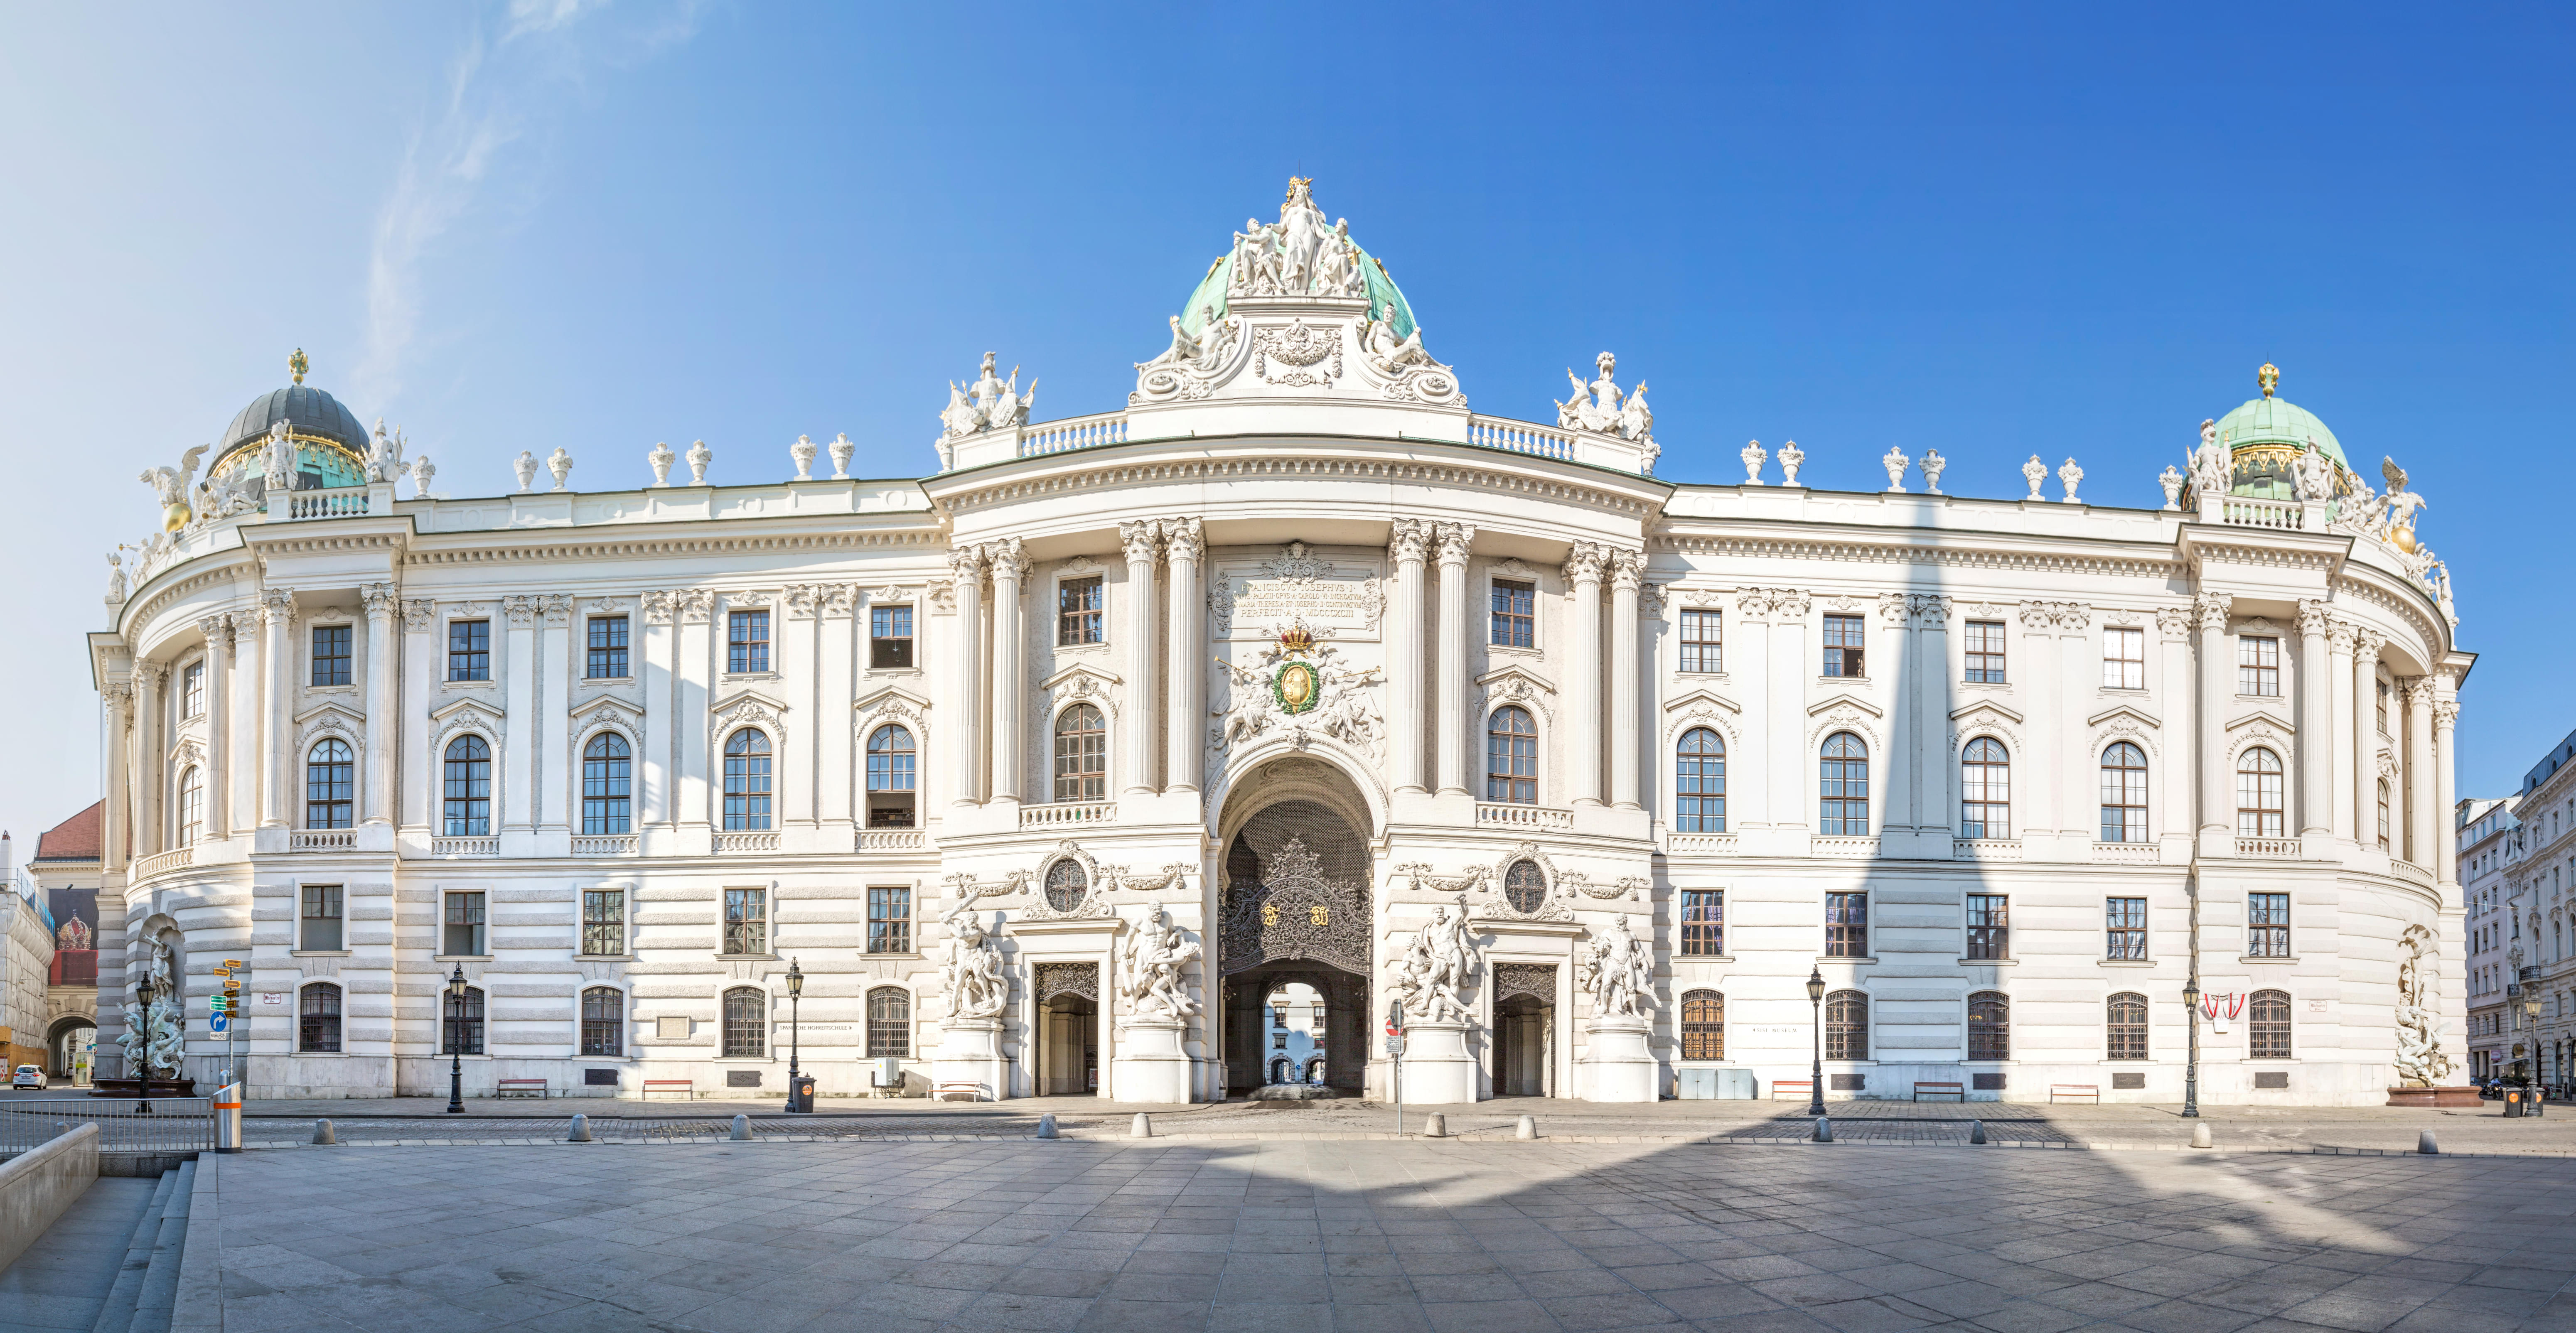 Visit the Spanish Riding School, most beautiful building of Vienna